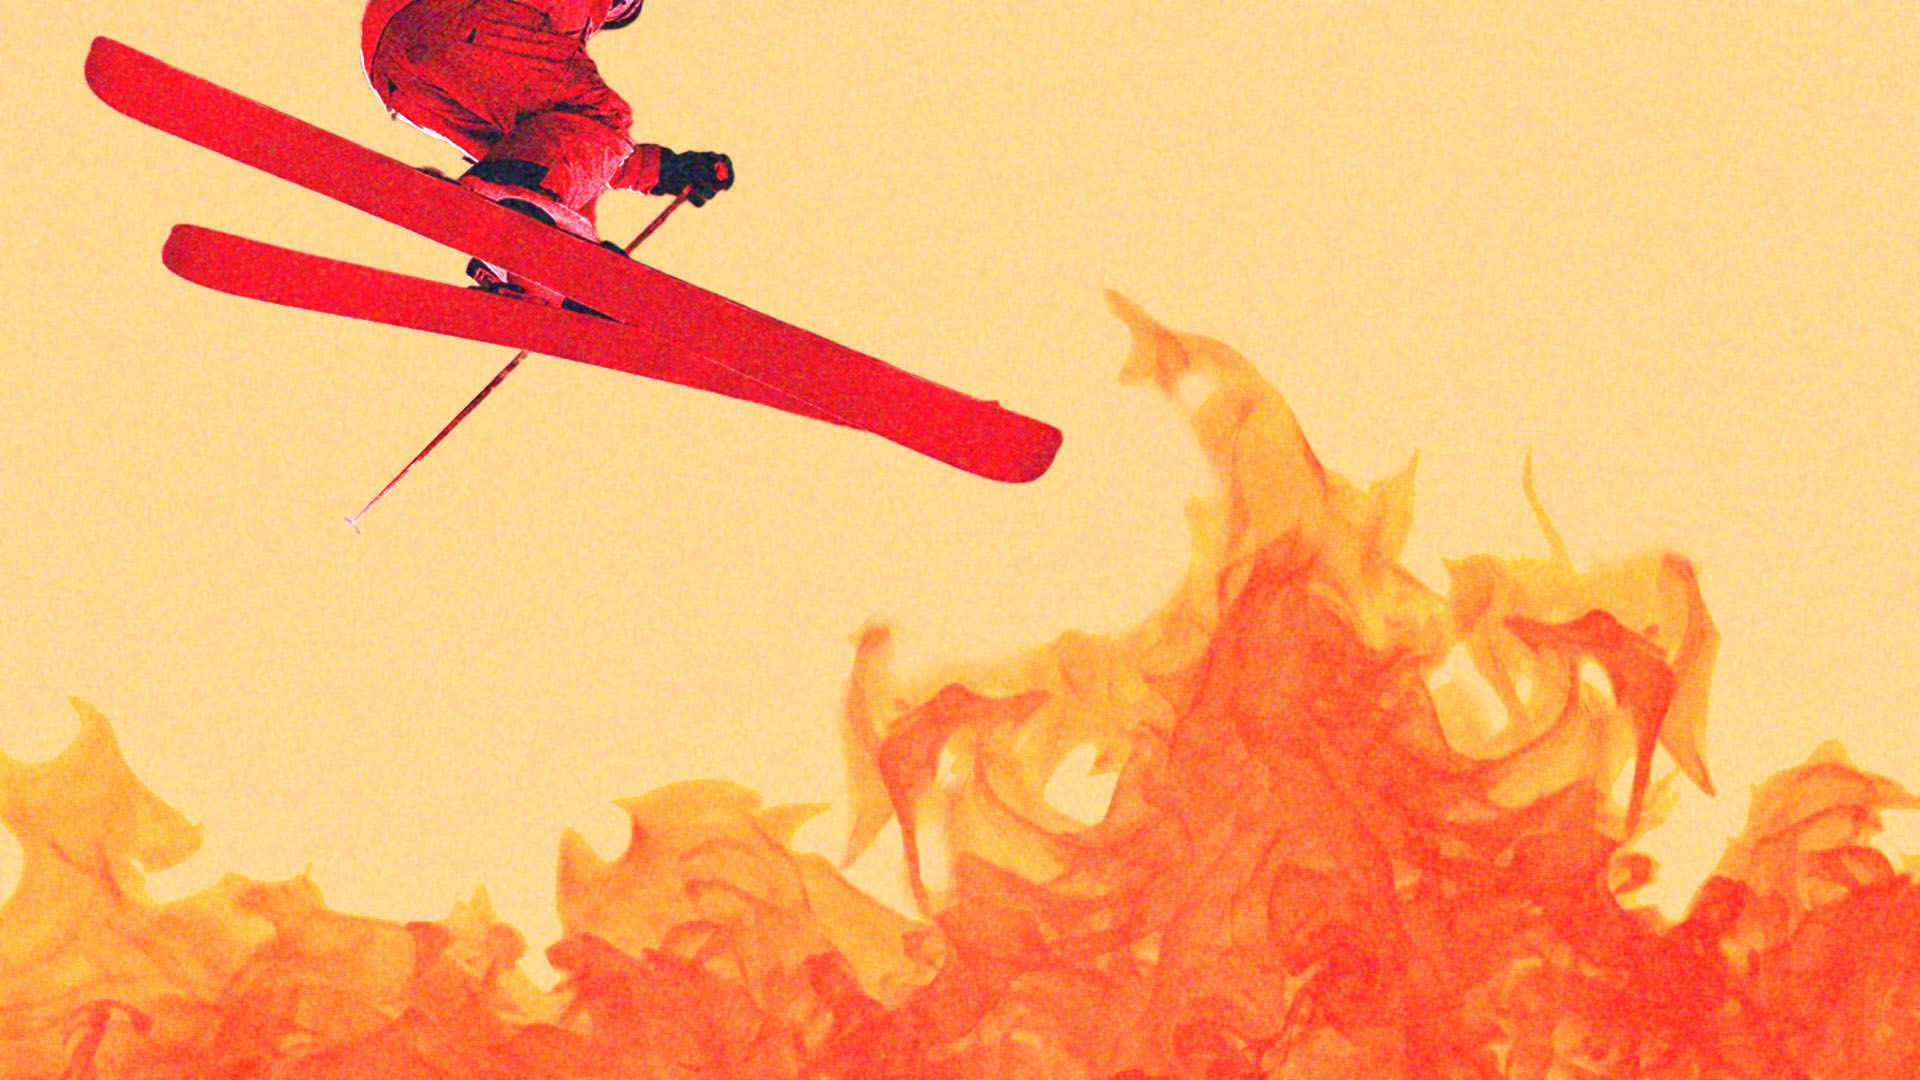 Illustration of a person on skis jumping over mountains made of fire